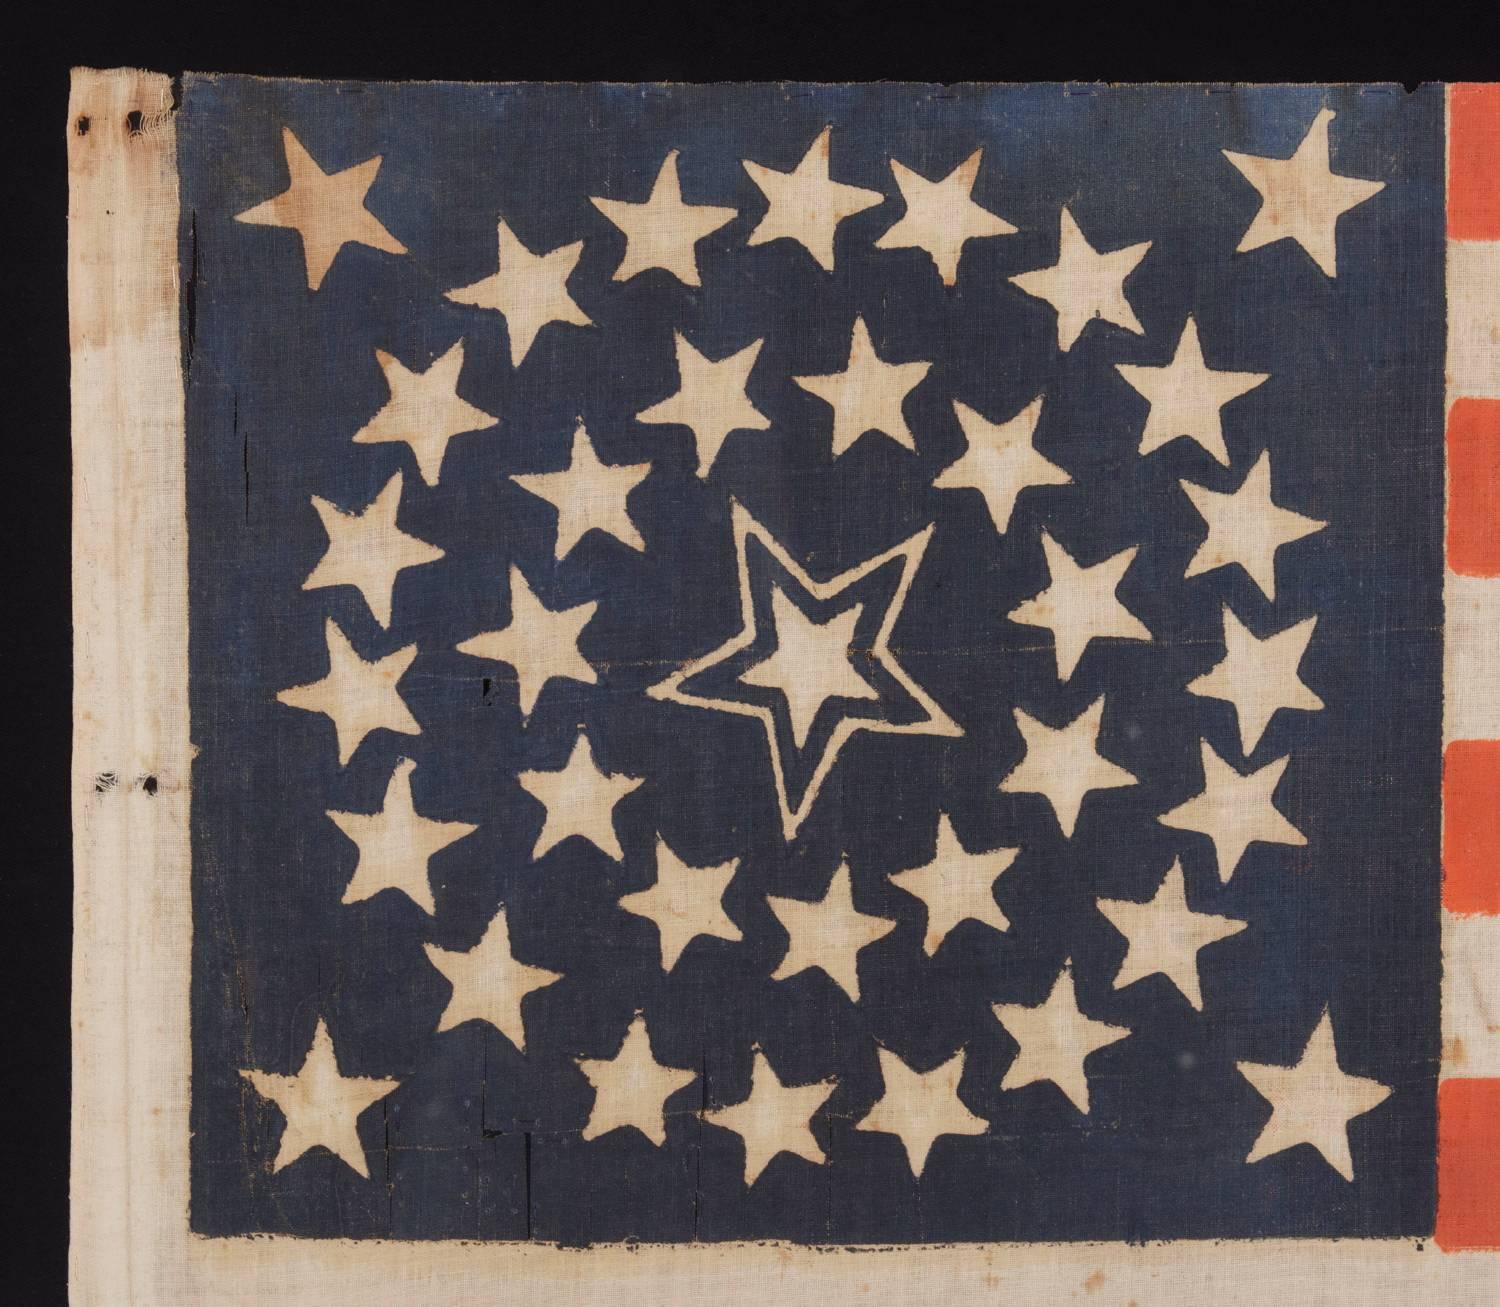 American 35 Stars in a Medallion Configuration with a Large Haloed Center Star